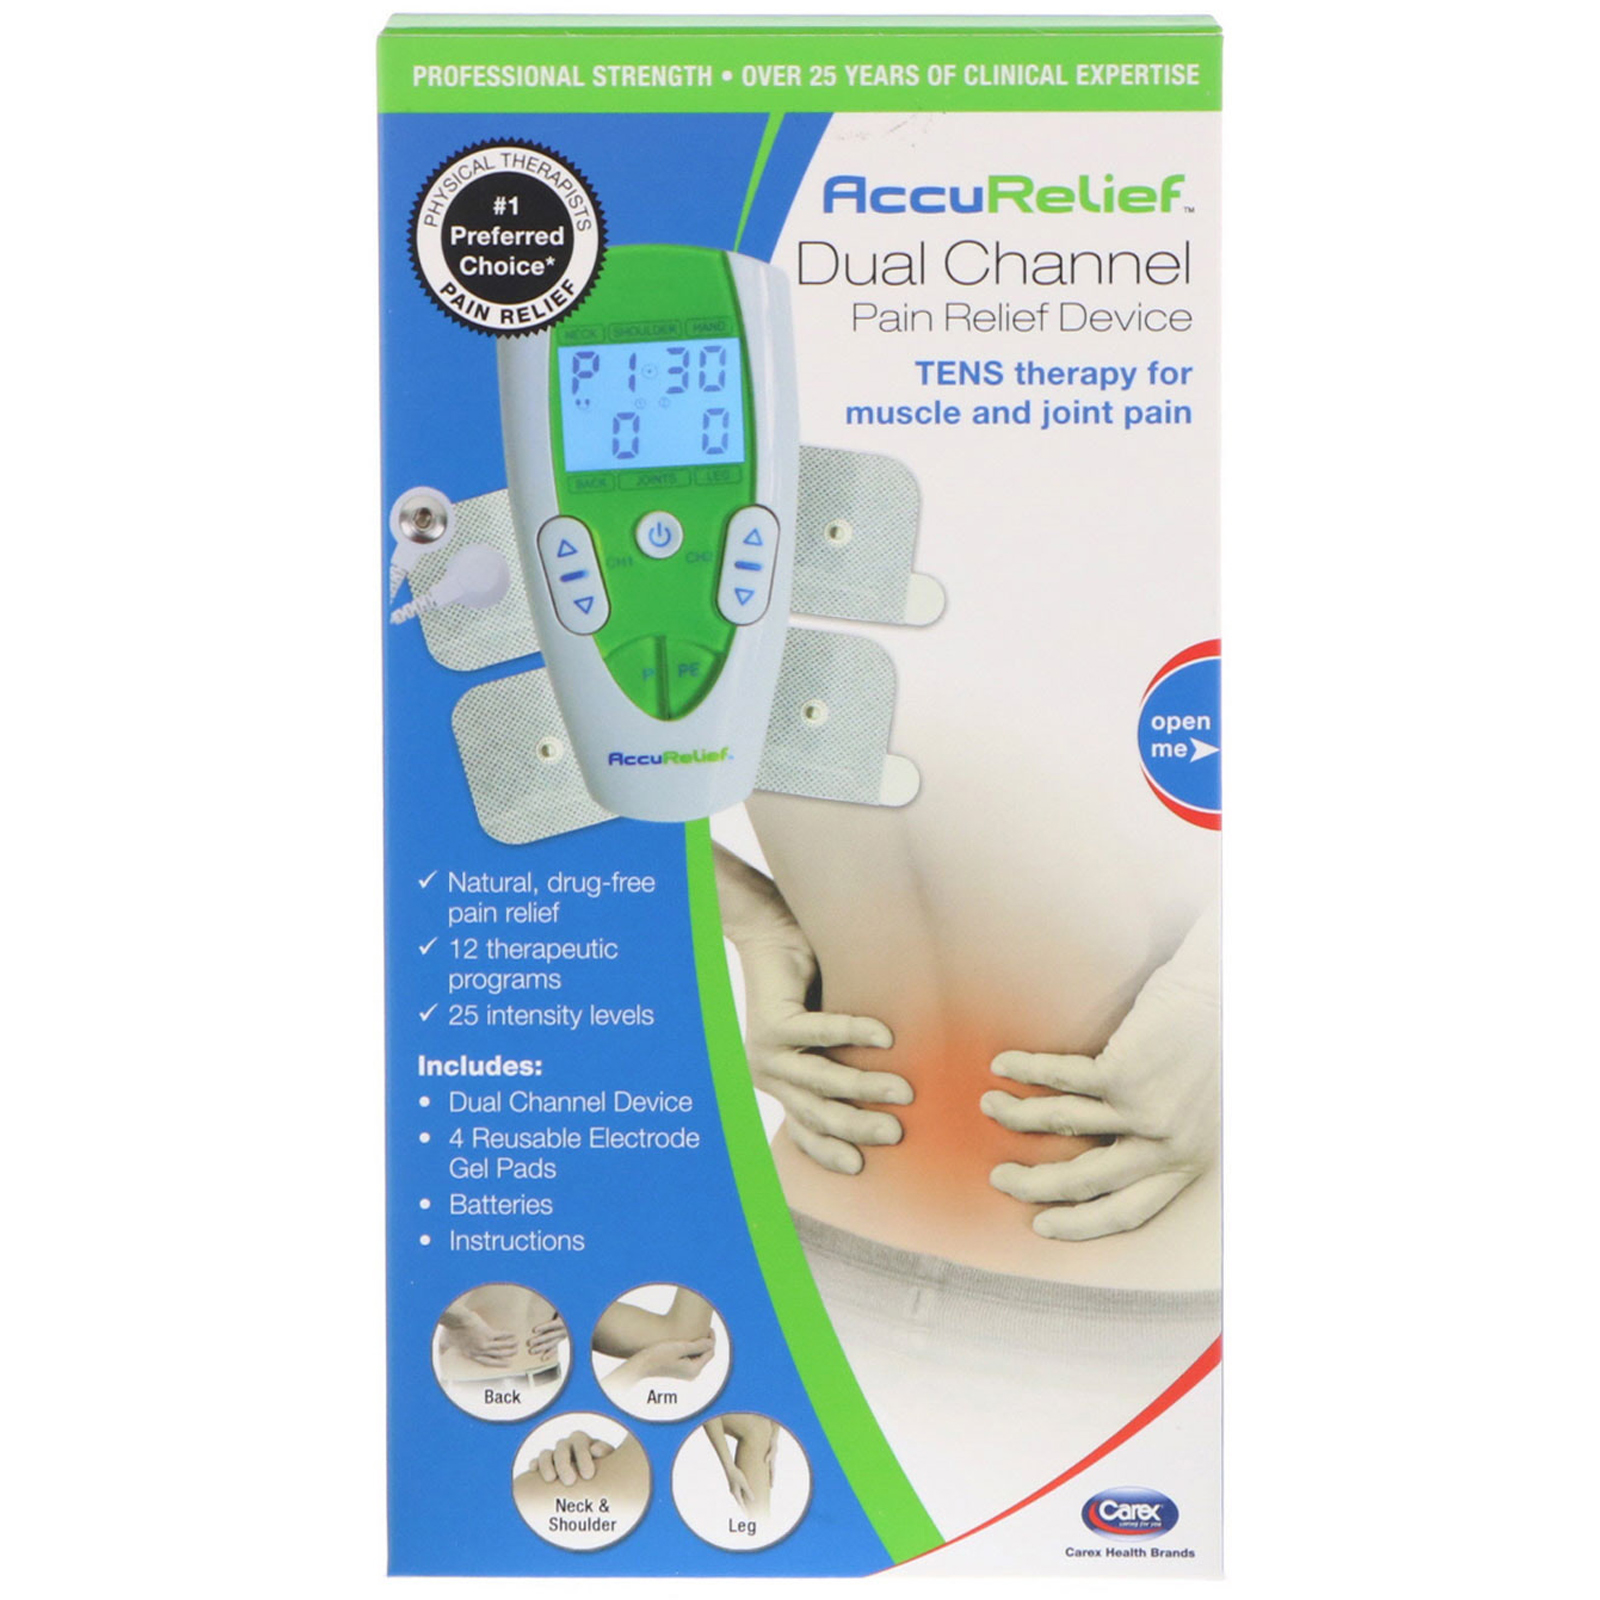 AccuRelief Dual Channel Pain Relief Device TENS Therapy for Muscle and Joint Pain 1 Dual Channel Device & 4 Electrode Gel Pads